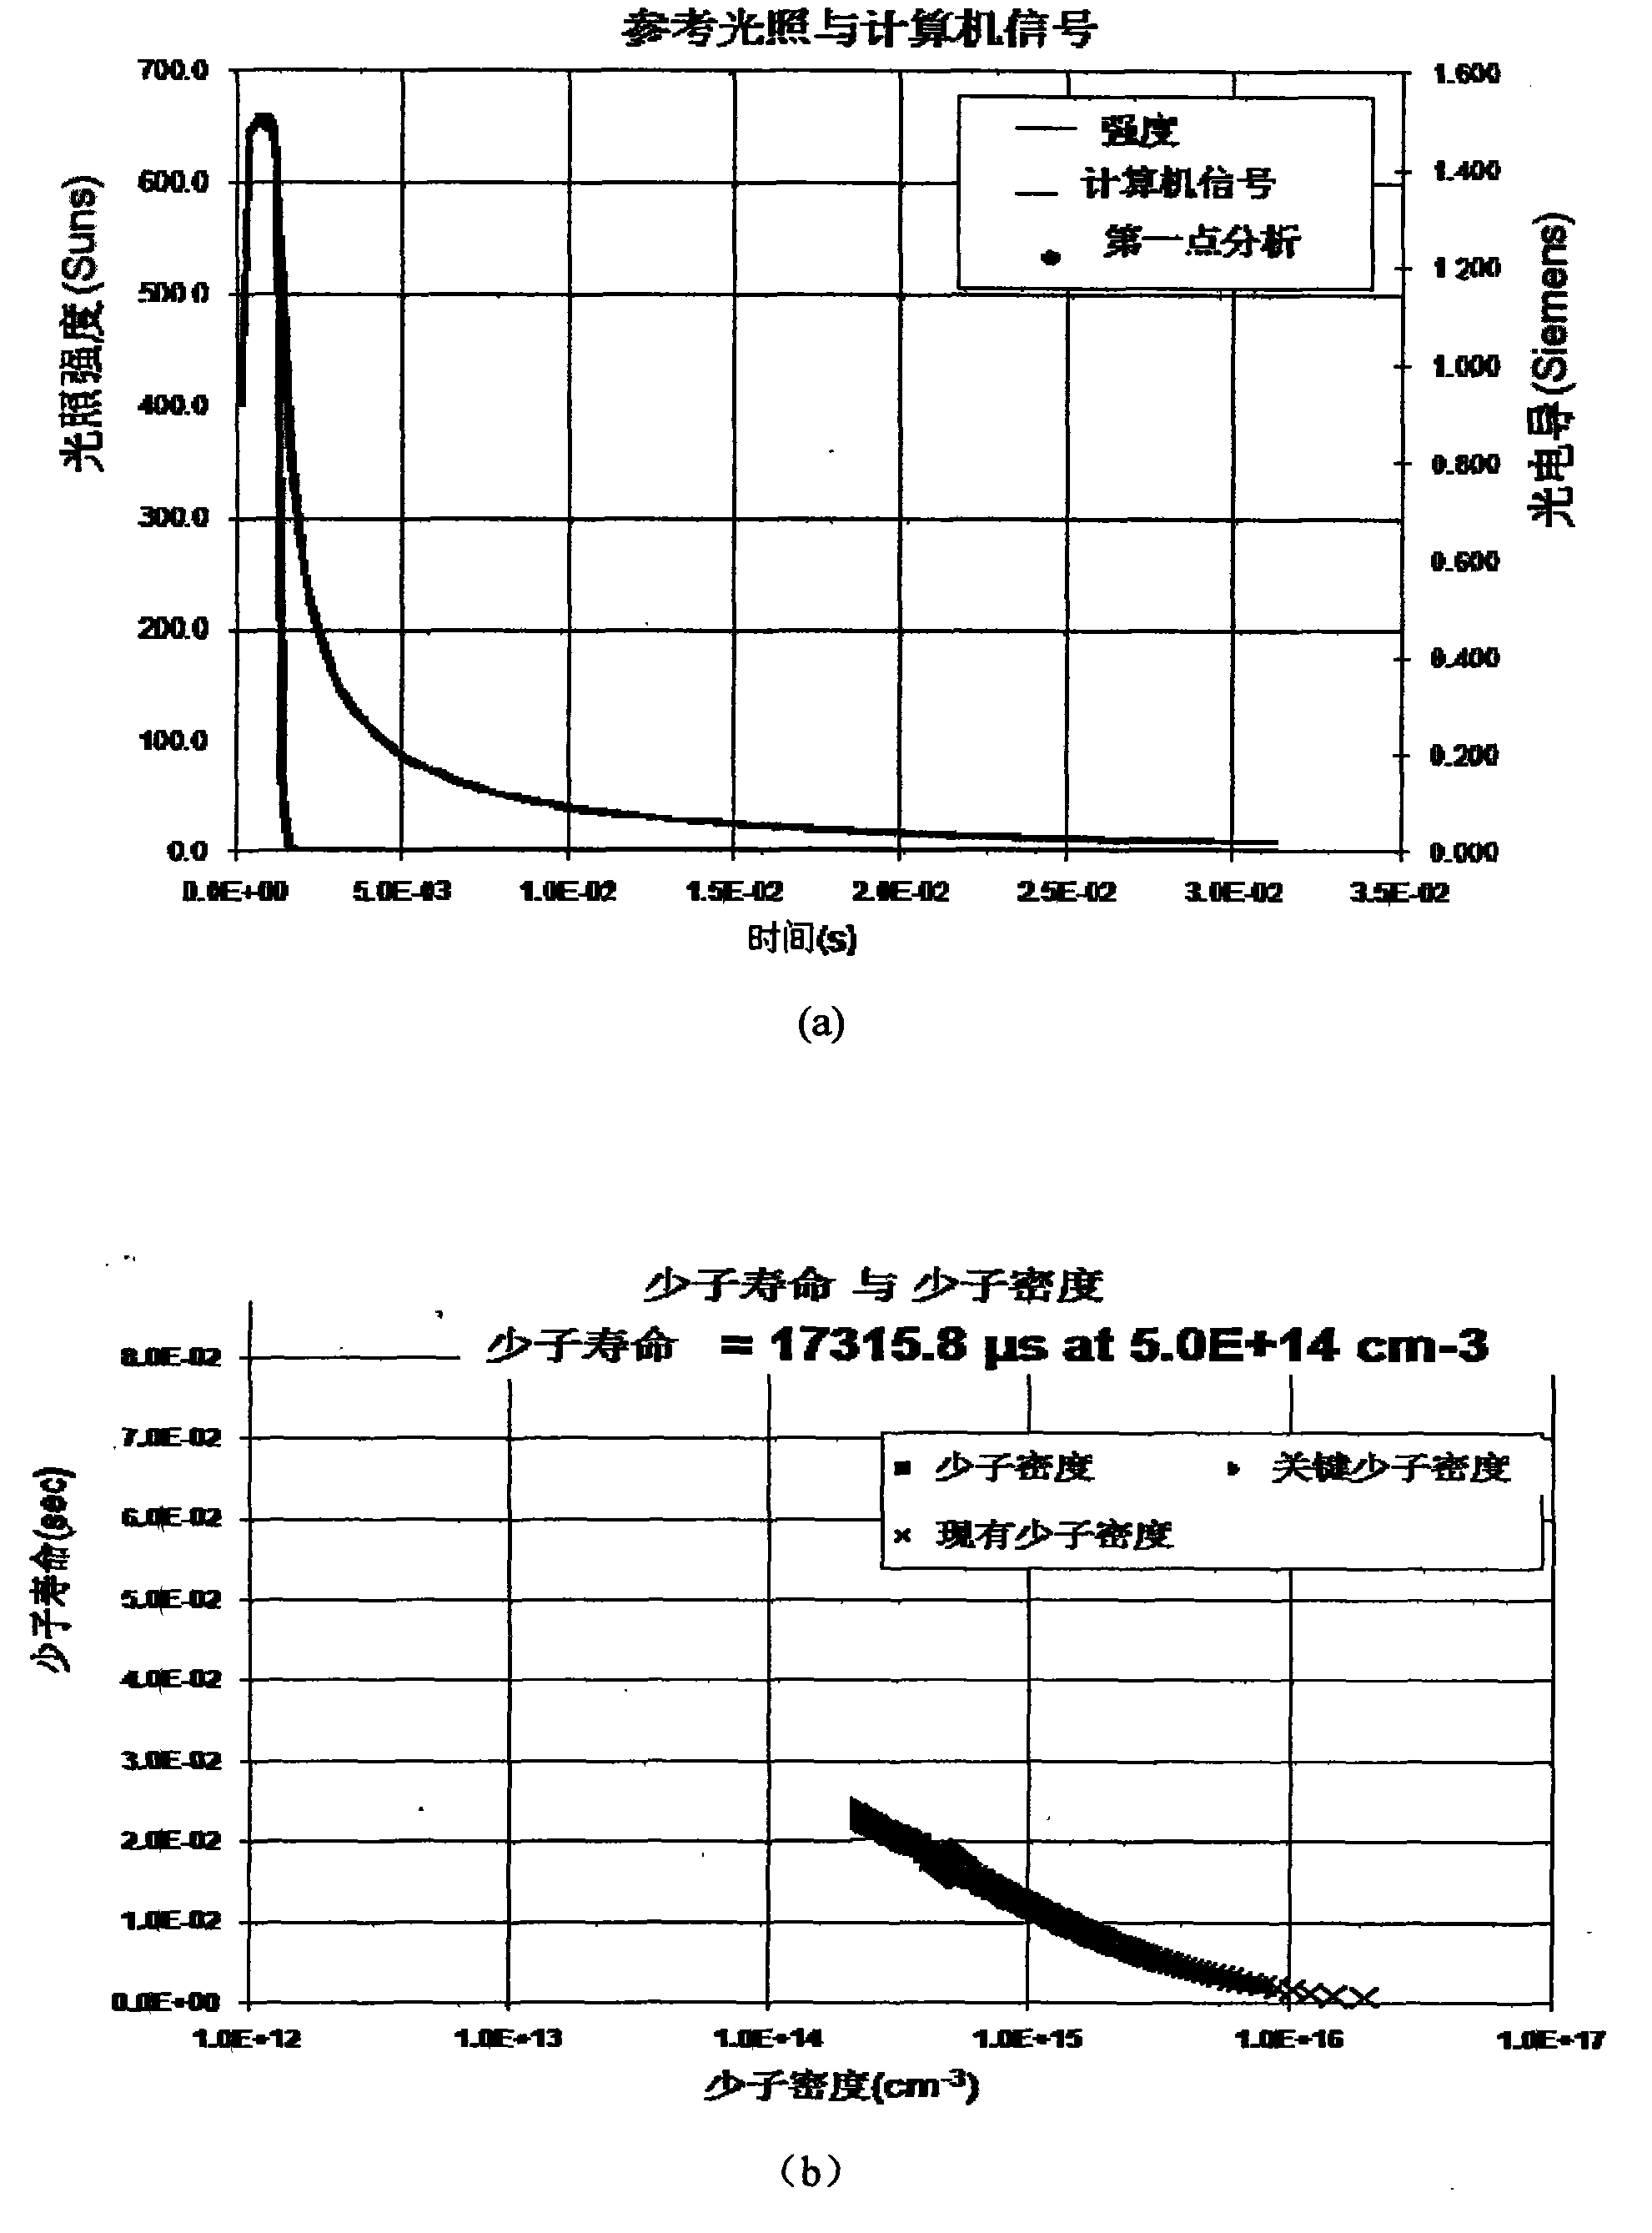 Growth process for N-type solar energy silicon single crystal with minority carrier service life of larger than or equal to 1,000 microseconds